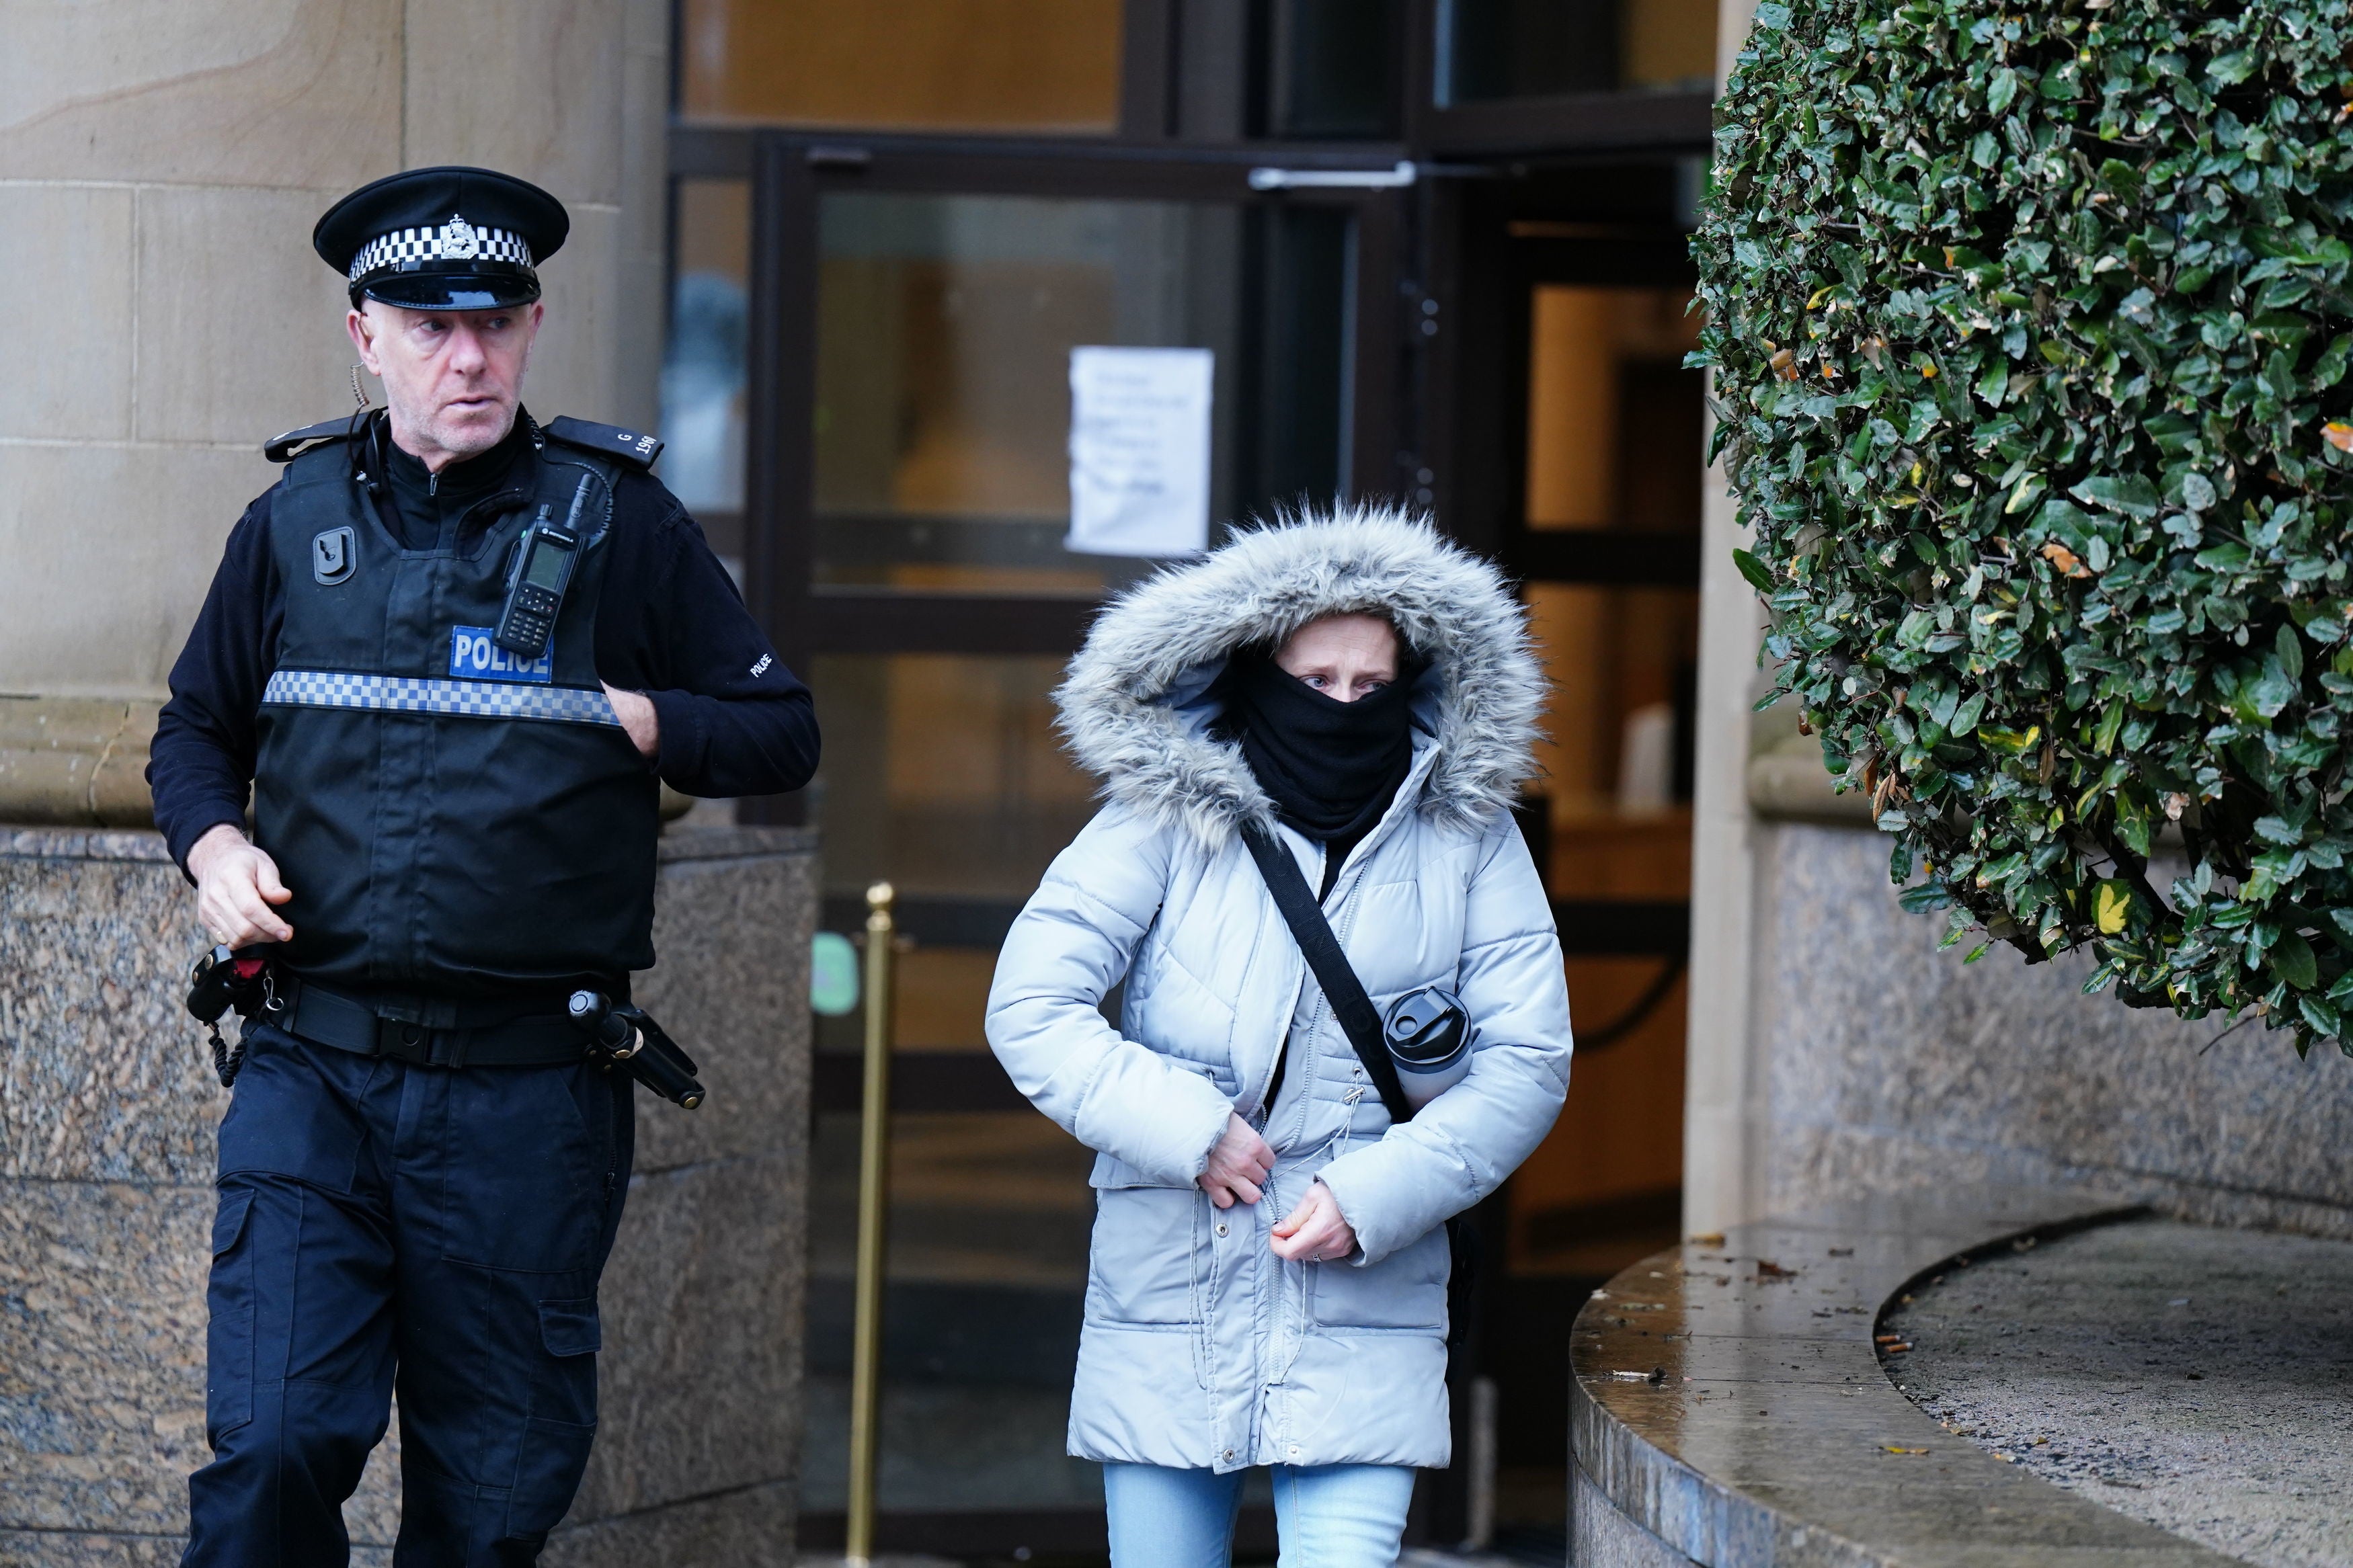 Marianne Gallagher, 38, had her sentenced deffered at the High Court in Glasgow after being found guilty of assaulting a child. She was cleared of all other charges.